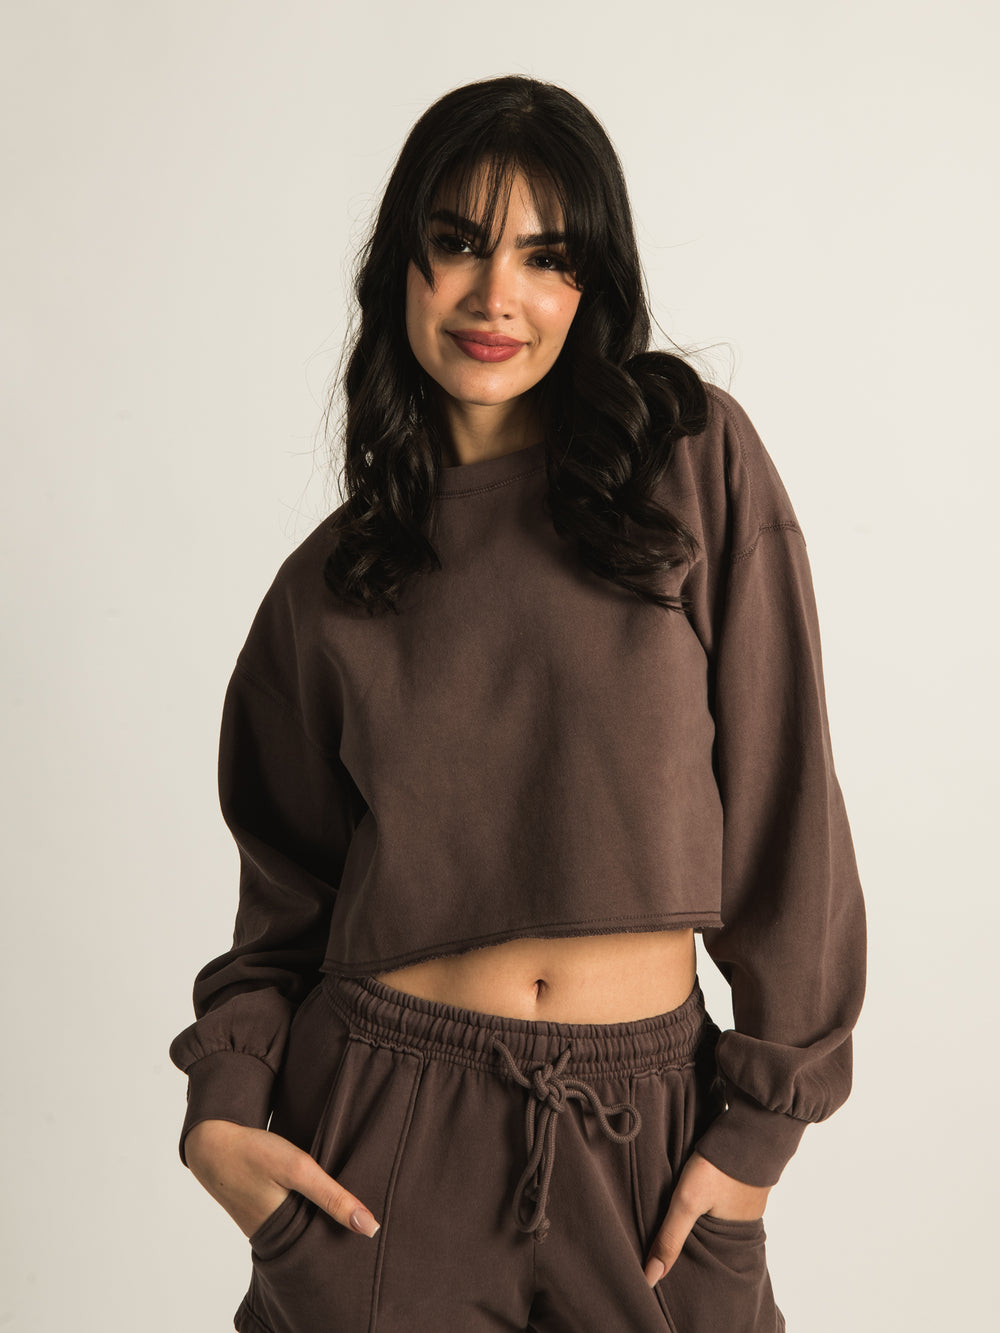 HARLOW GISELLE CROPPED CREW  - CLEARANCE